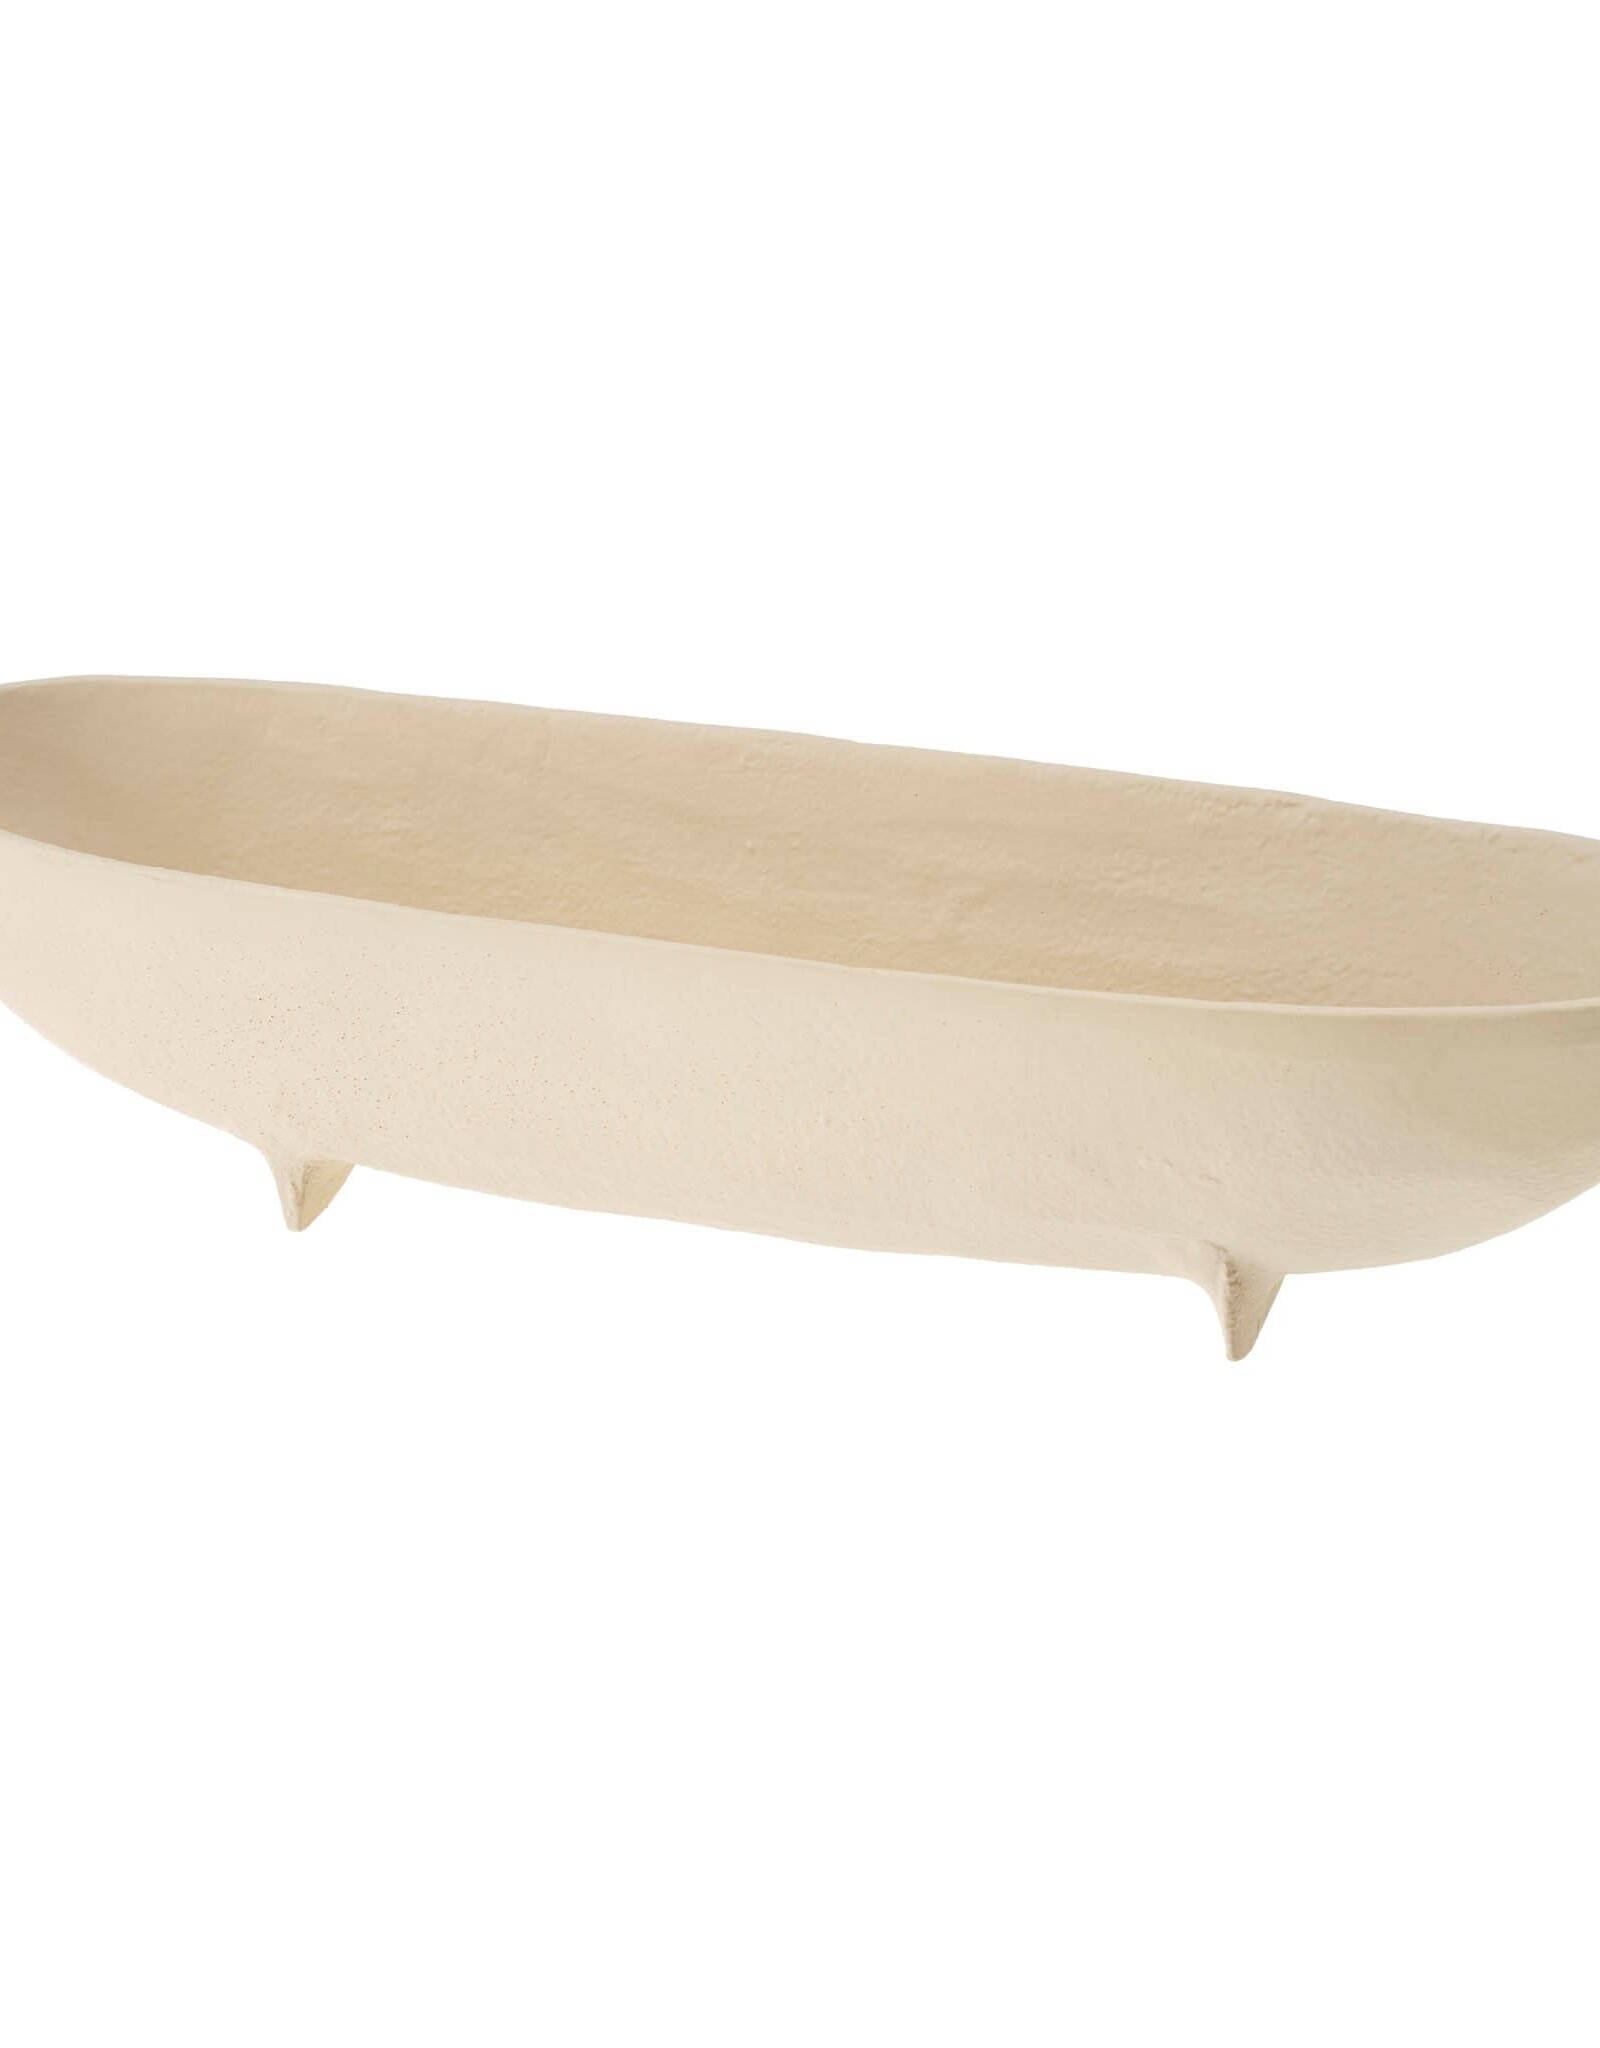 Rockform Footed Dish, Large - Ivory